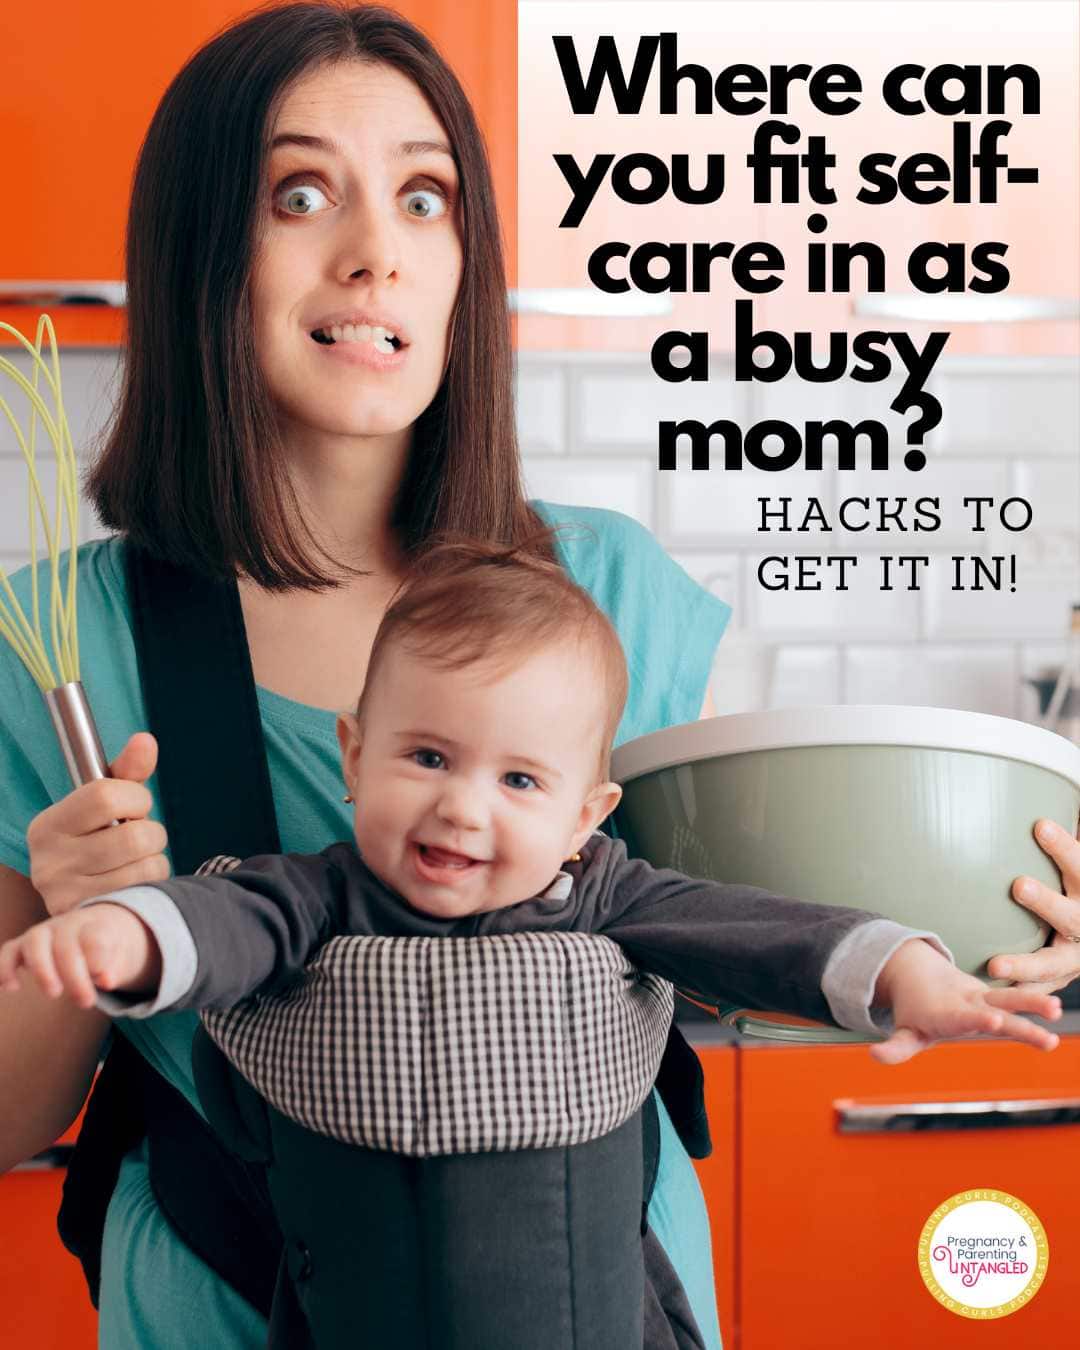 "Self-care tips for busy moms: Learn to prioritize time for yourself during the school year. Discover the benefits of scheduling self-care, staying active, and asking for help. Find out how to delegate some tasks to others, involve your kids in self-care, and make time for your personal needs despite a busy schedule. Keep things simple and remember to take care of yourself." via @pullingcurls